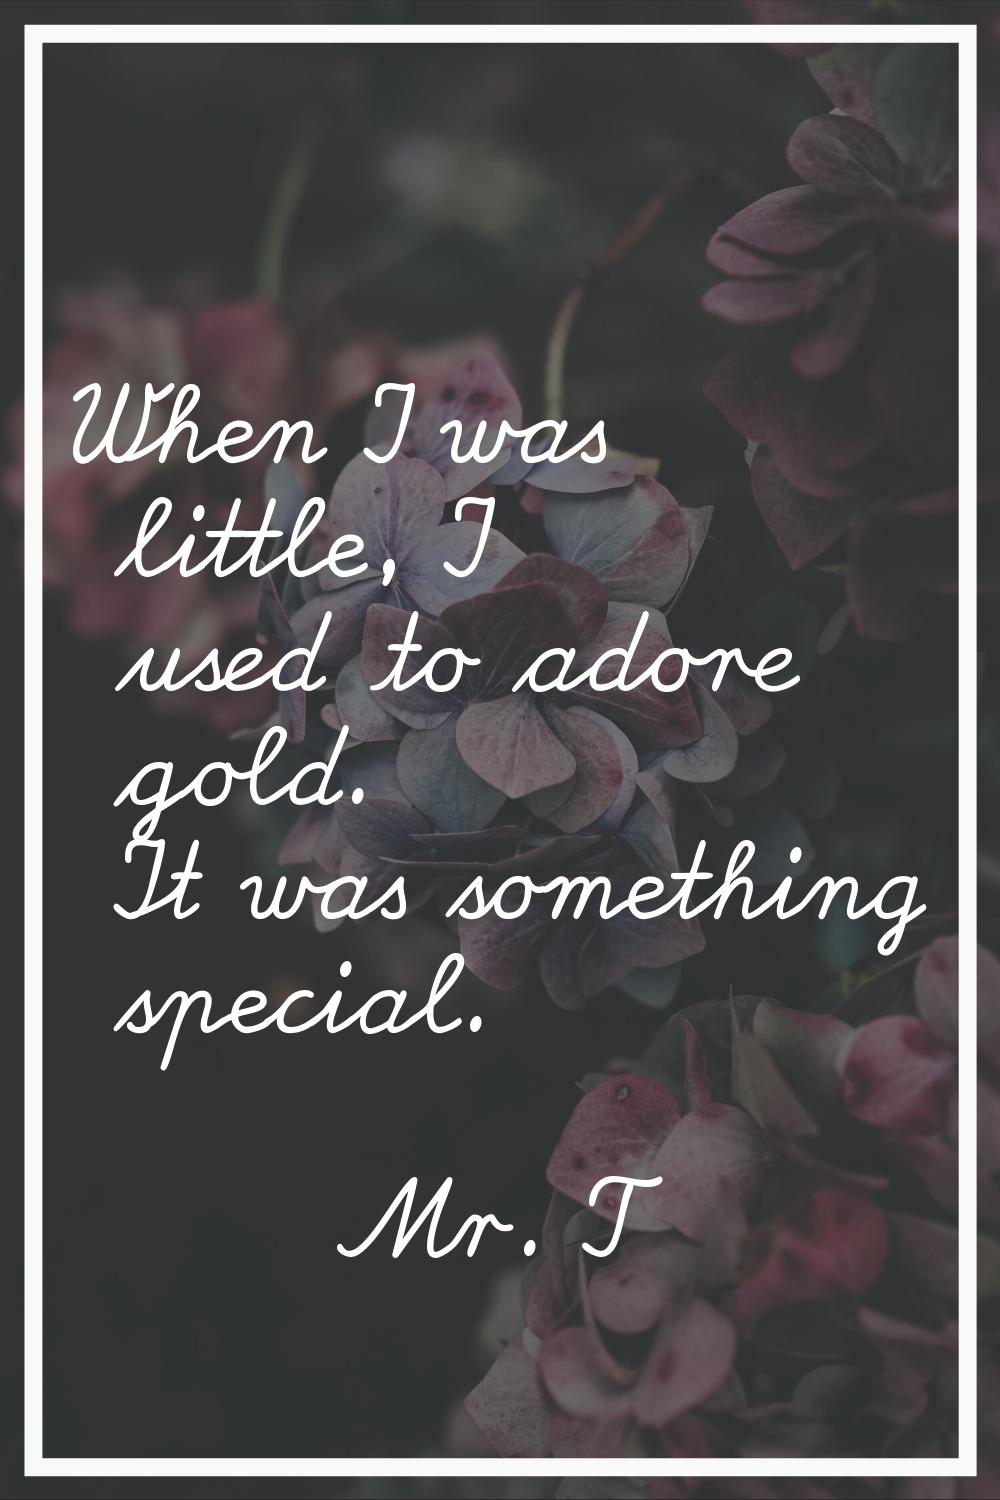 When I was little, I used to adore gold. It was something special.